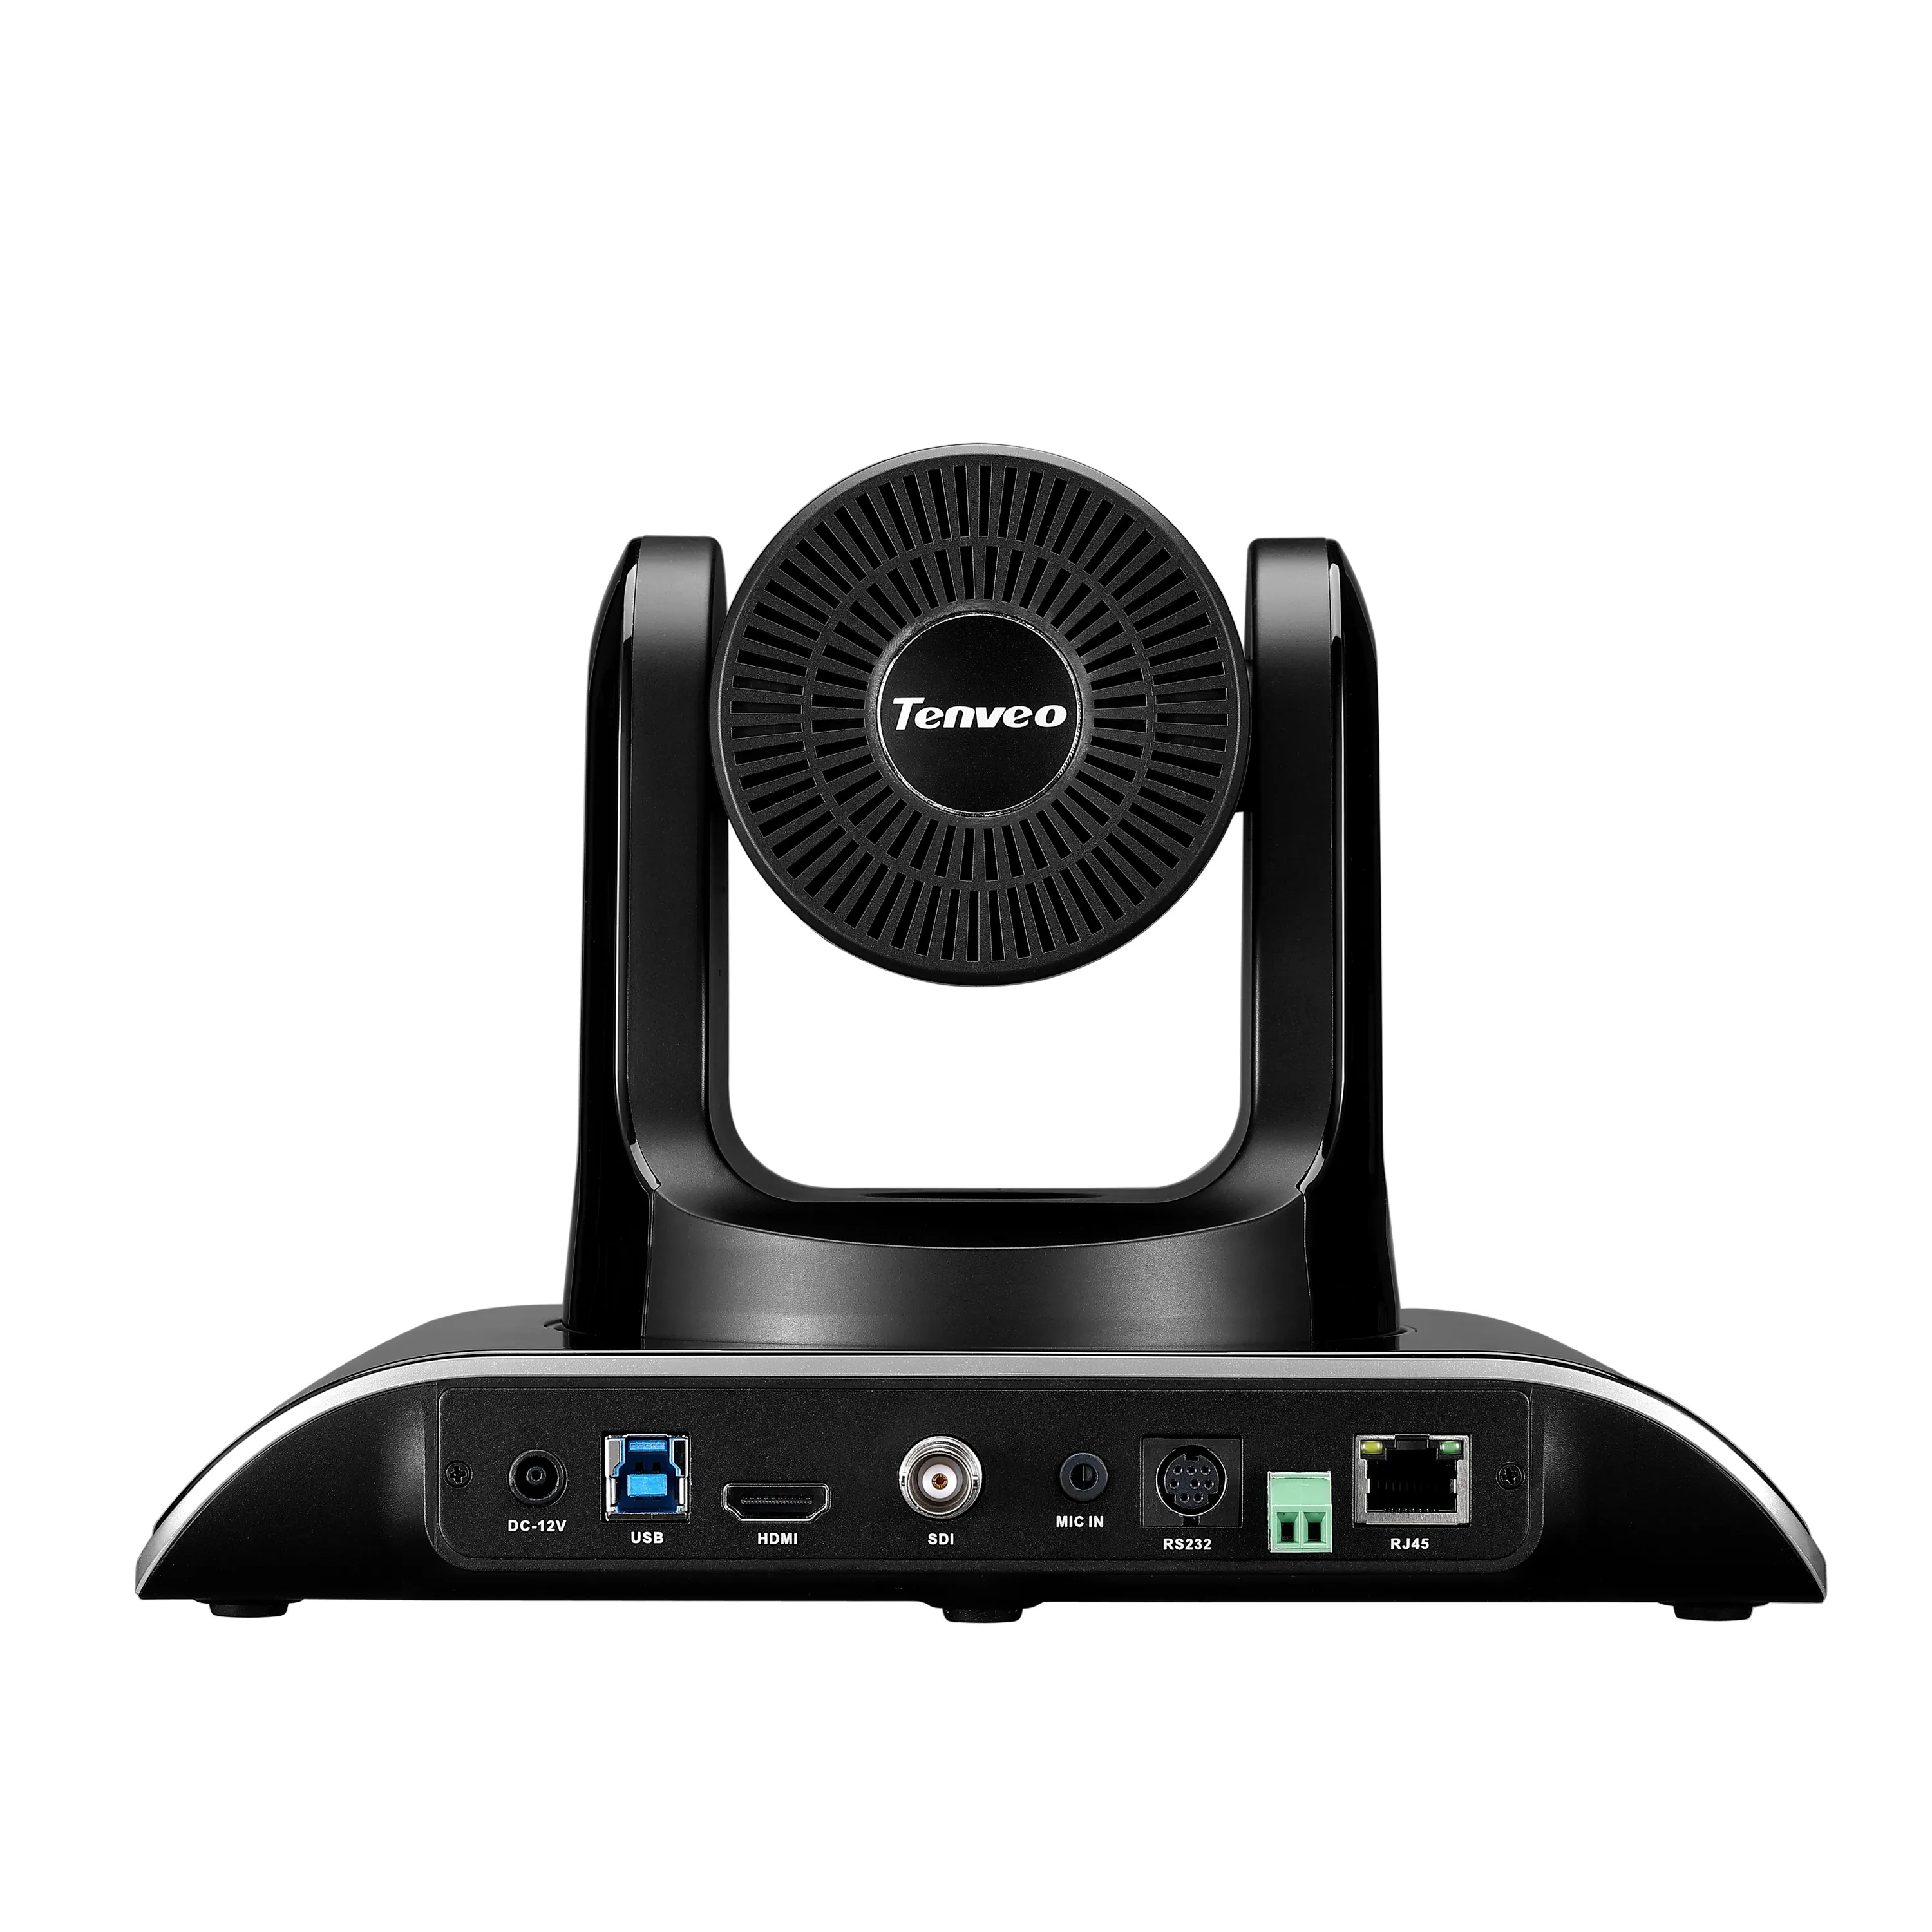 TEVO-VHD20N 20X zoom 1080p full hd video conference system high definition ip pzt camera